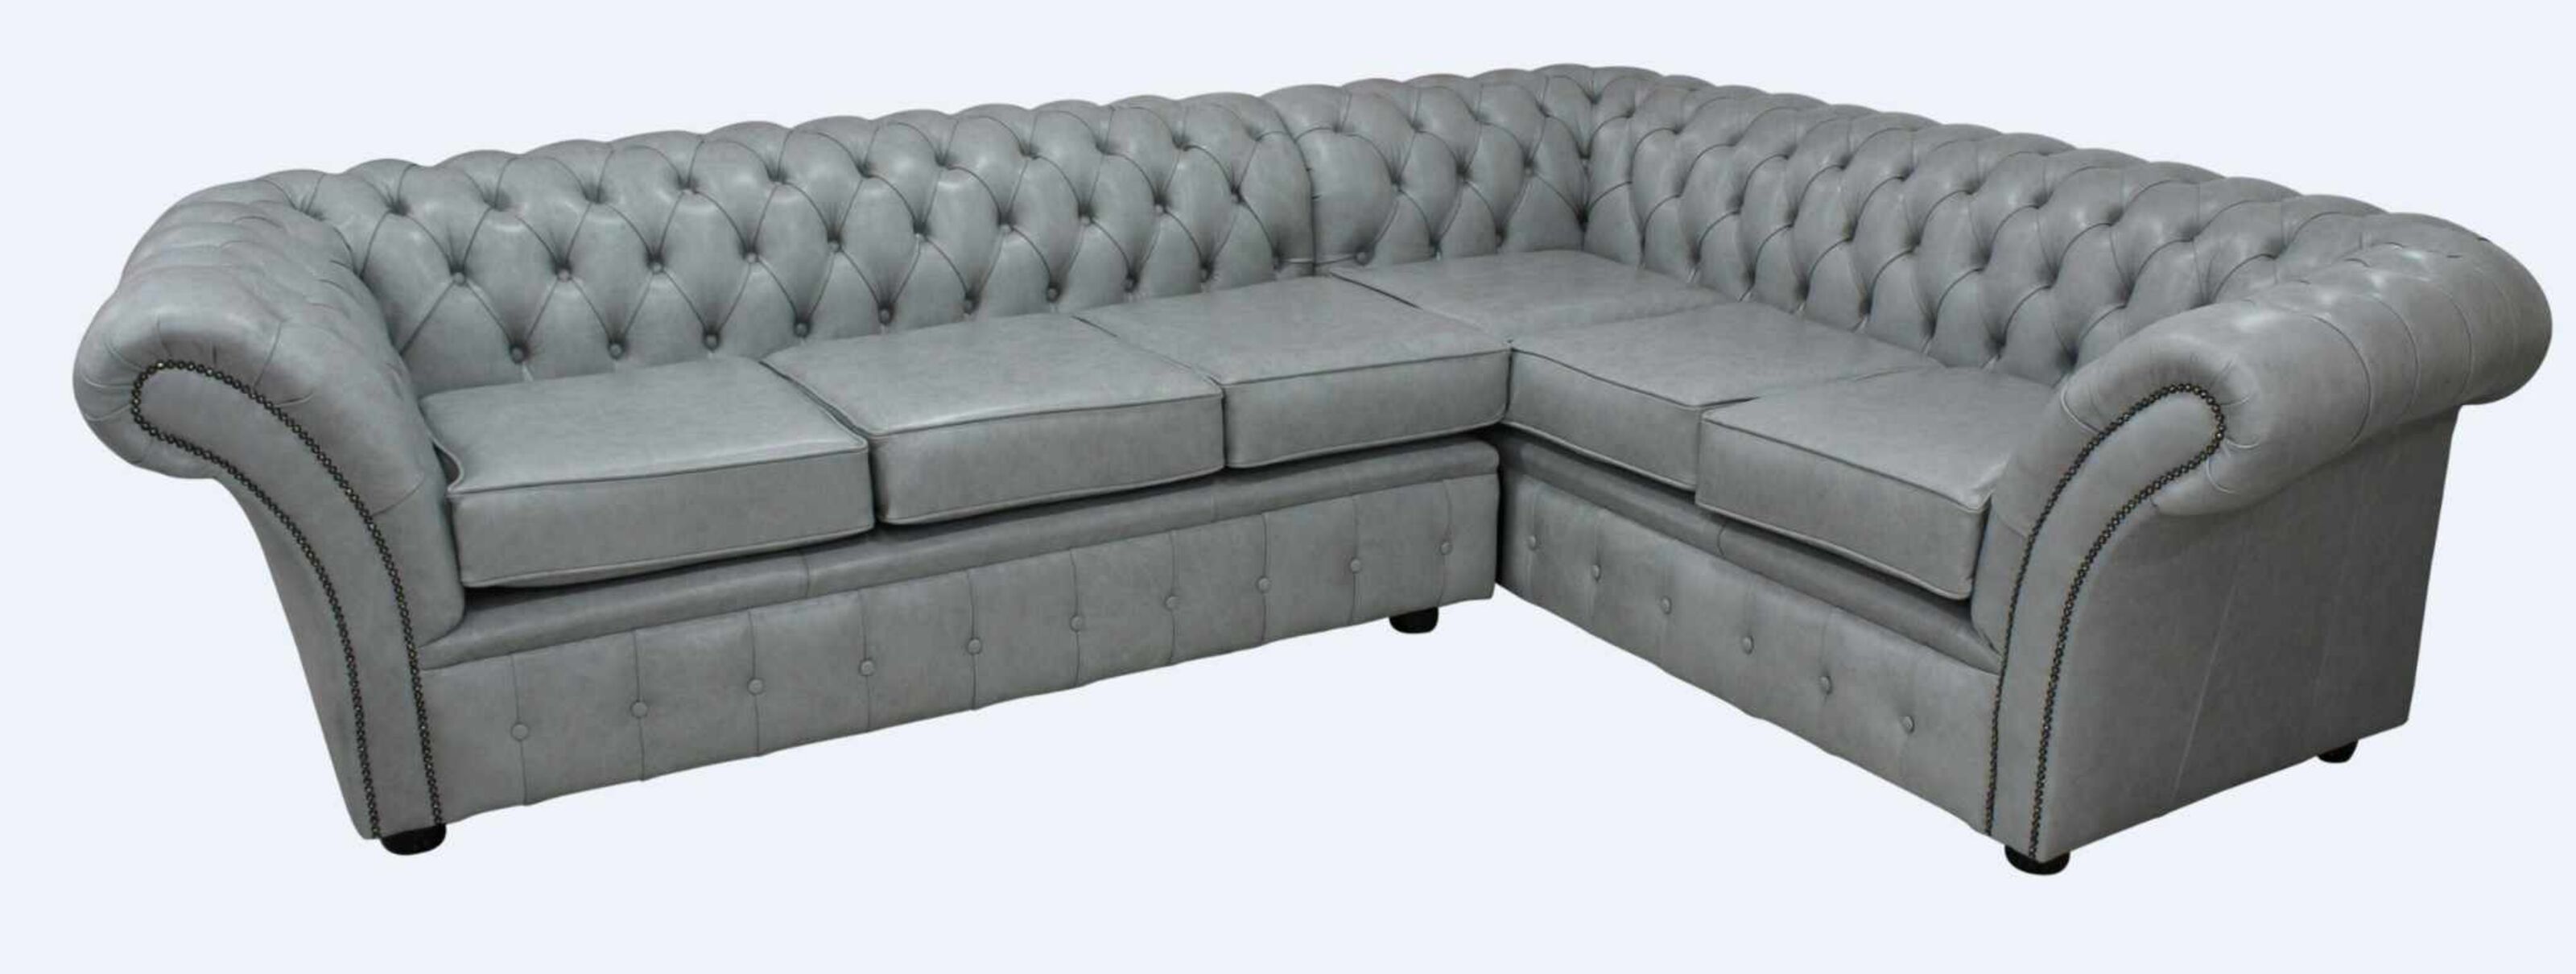 Elevate Your Home with Elegant & Comfortable La-Z-Boy Sofas  %Post Title